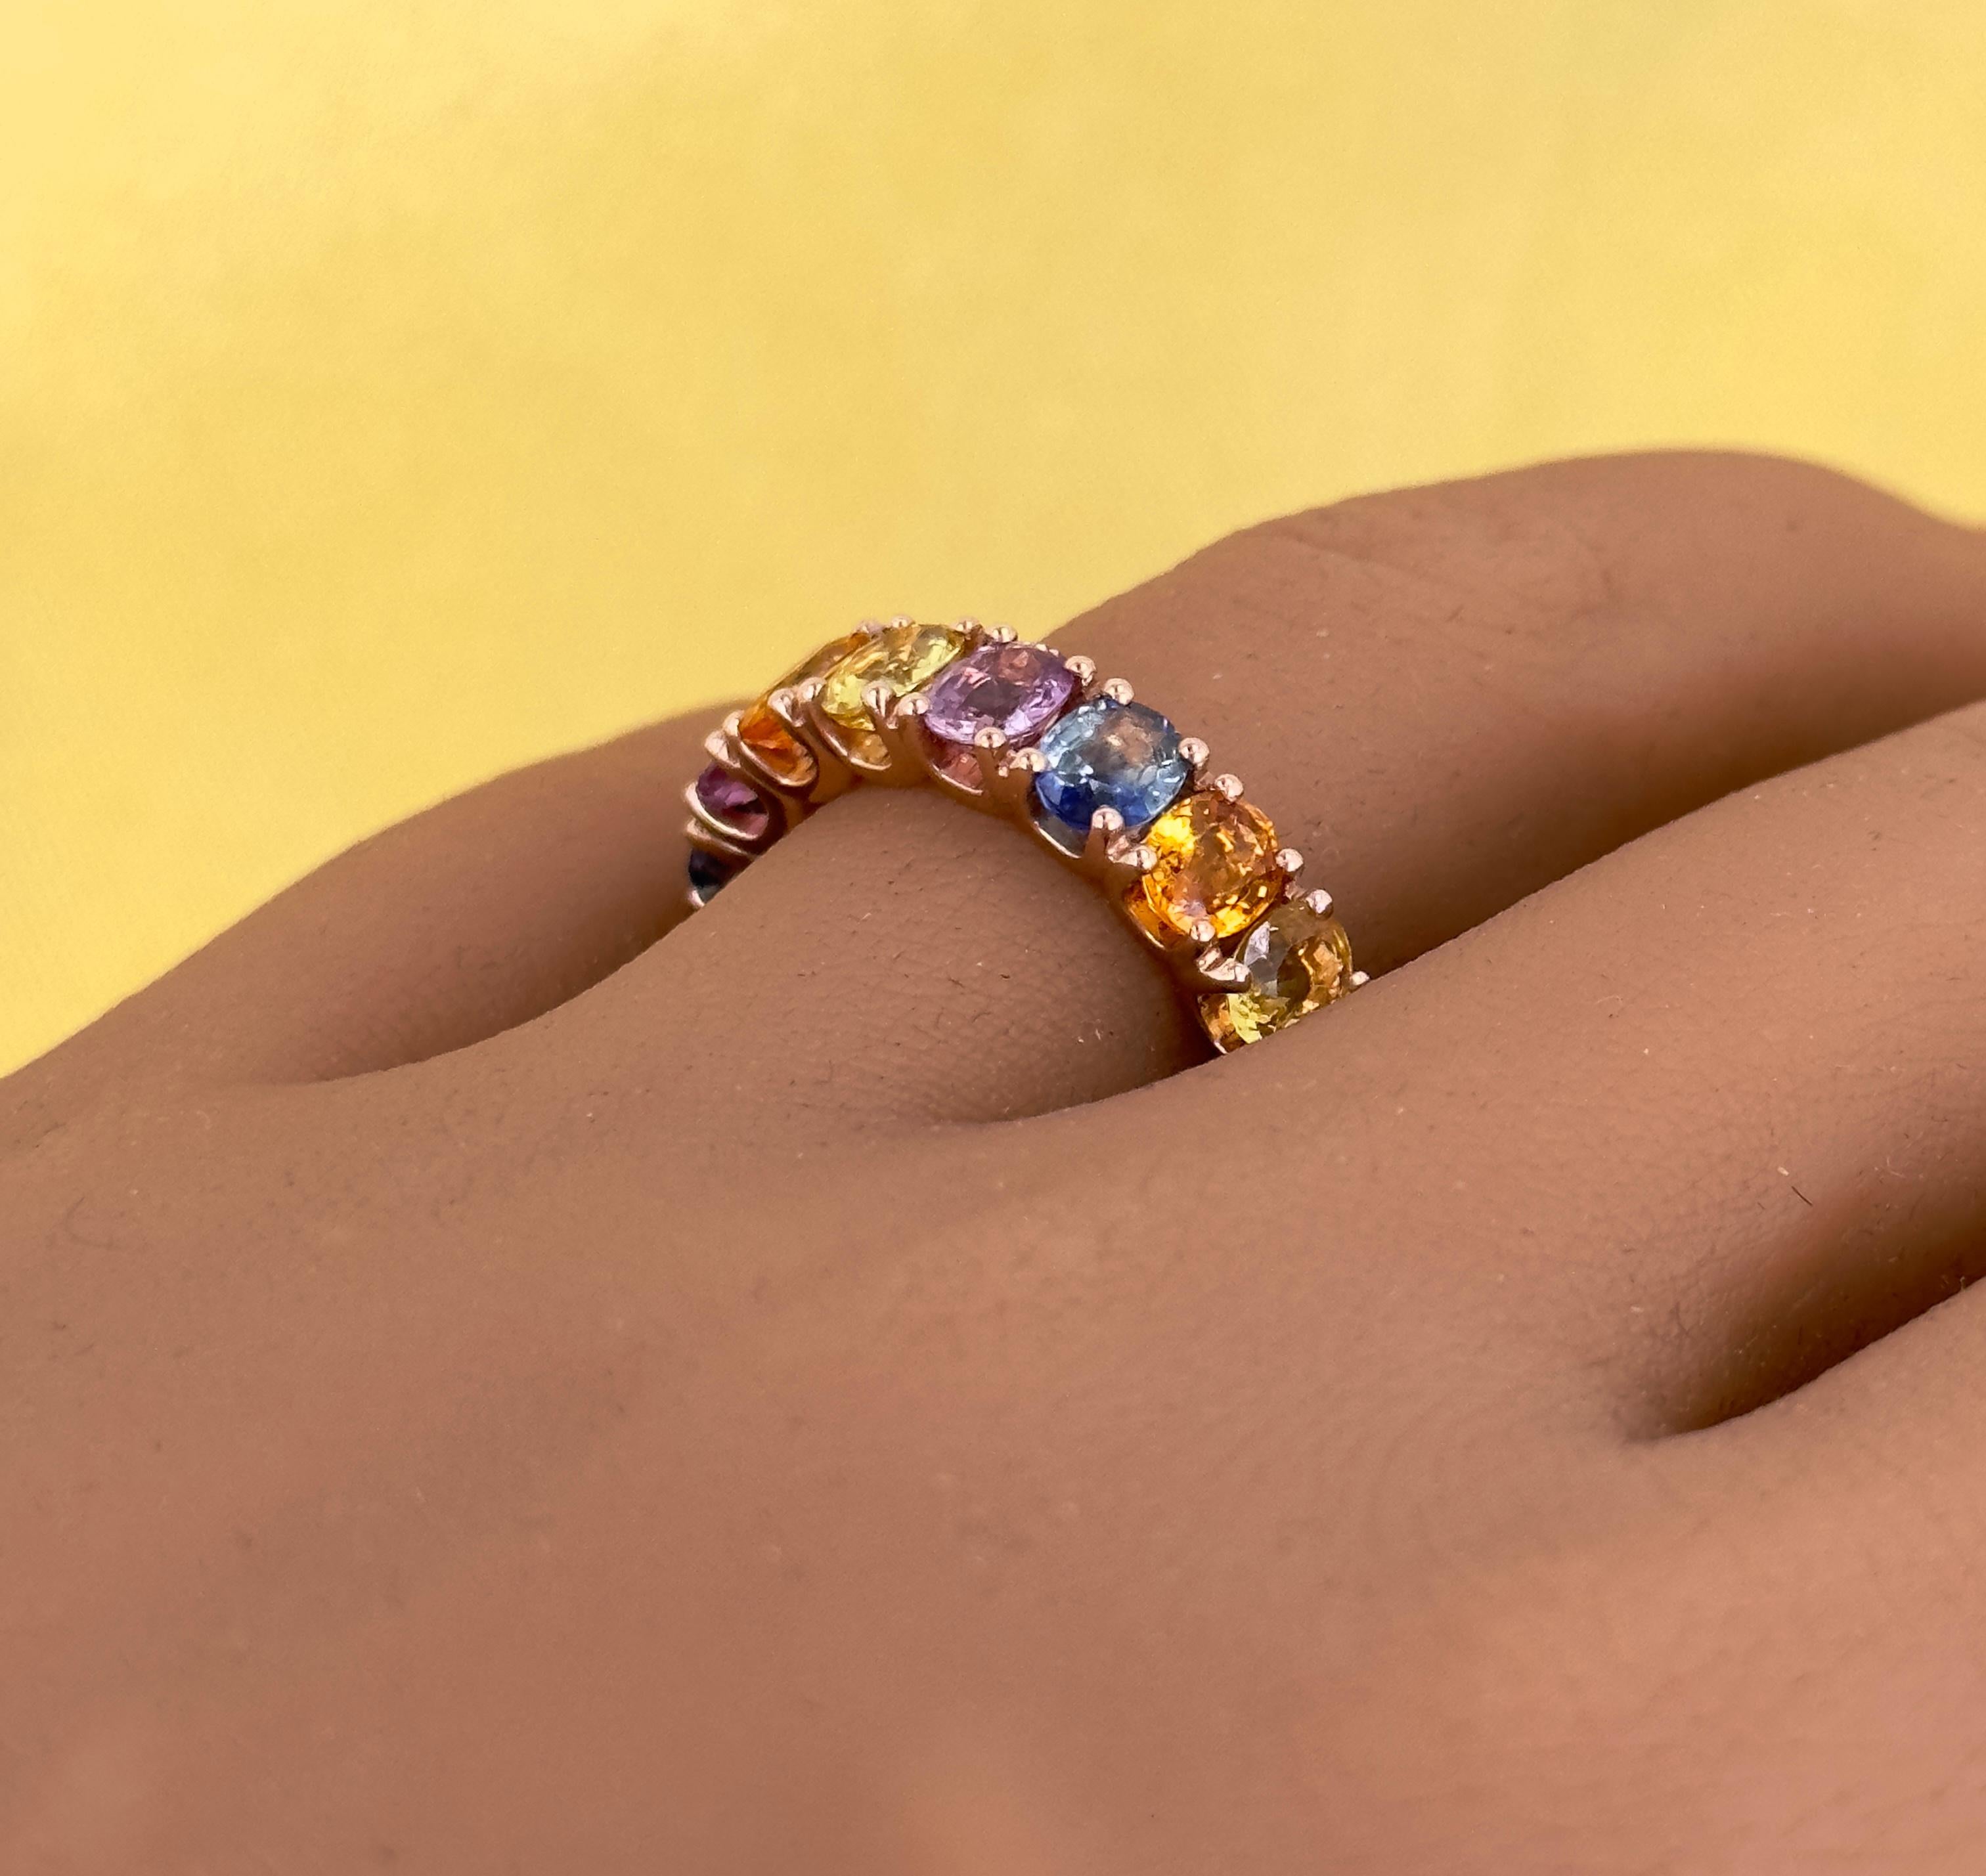 A fine collection of rainbow rings! The unified color of rose gold mixed with a combination of fancy sapphires! Genuine rainbow sapphire colors include orange, yellow, pink, blue, and green! Our rings are made in 14k and 18k rose gold with a basket